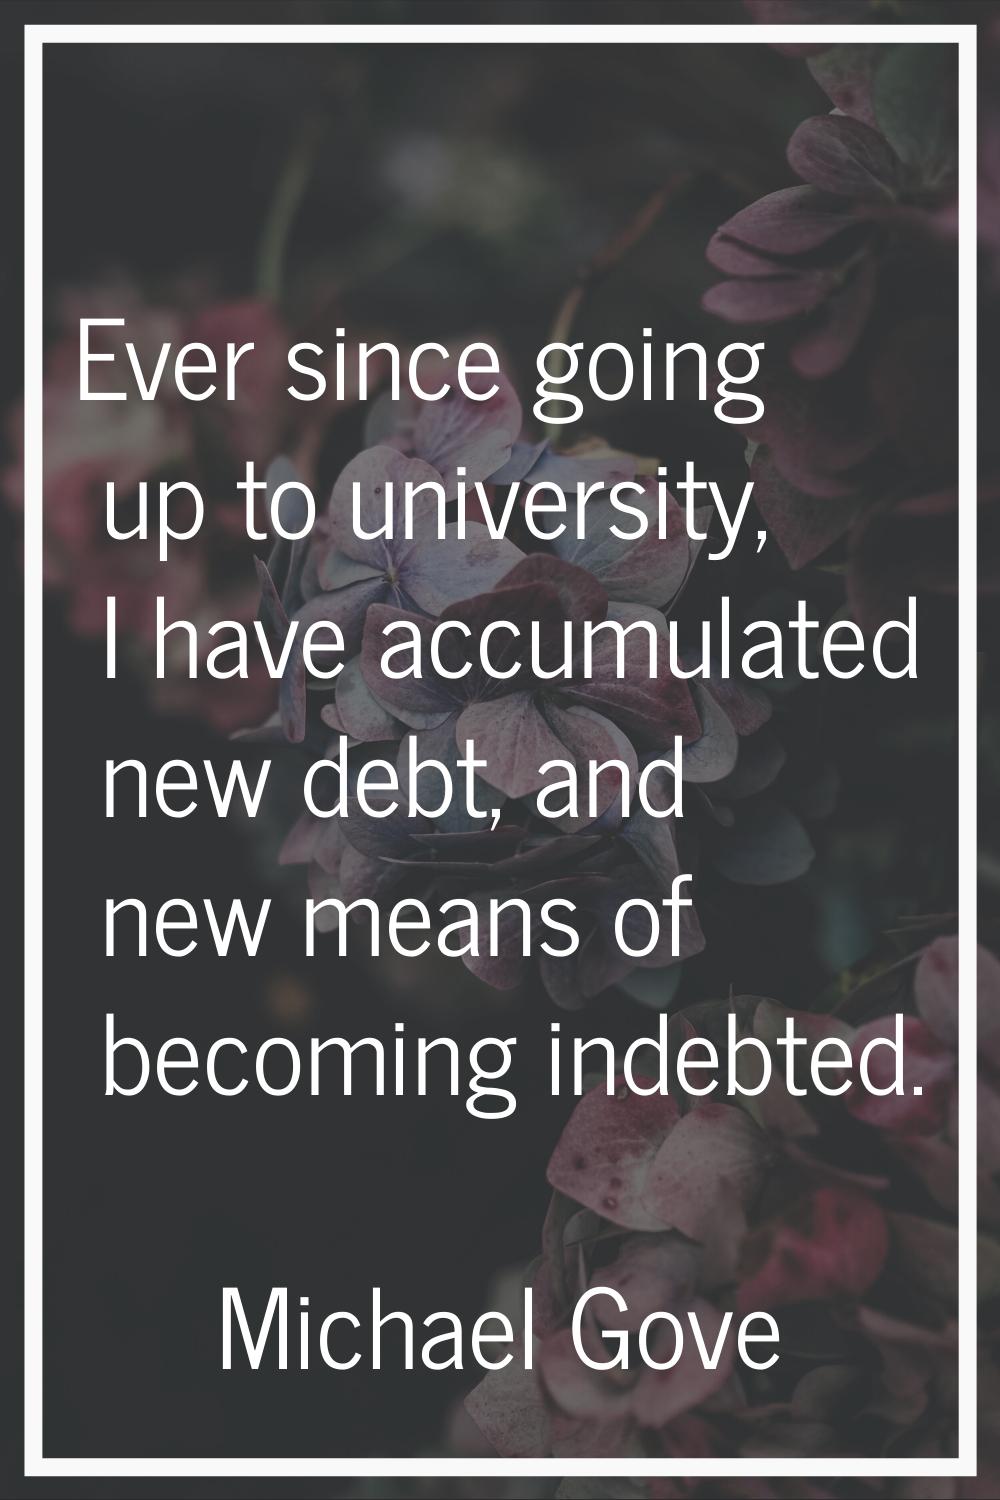 Ever since going up to university, I have accumulated new debt, and new means of becoming indebted.